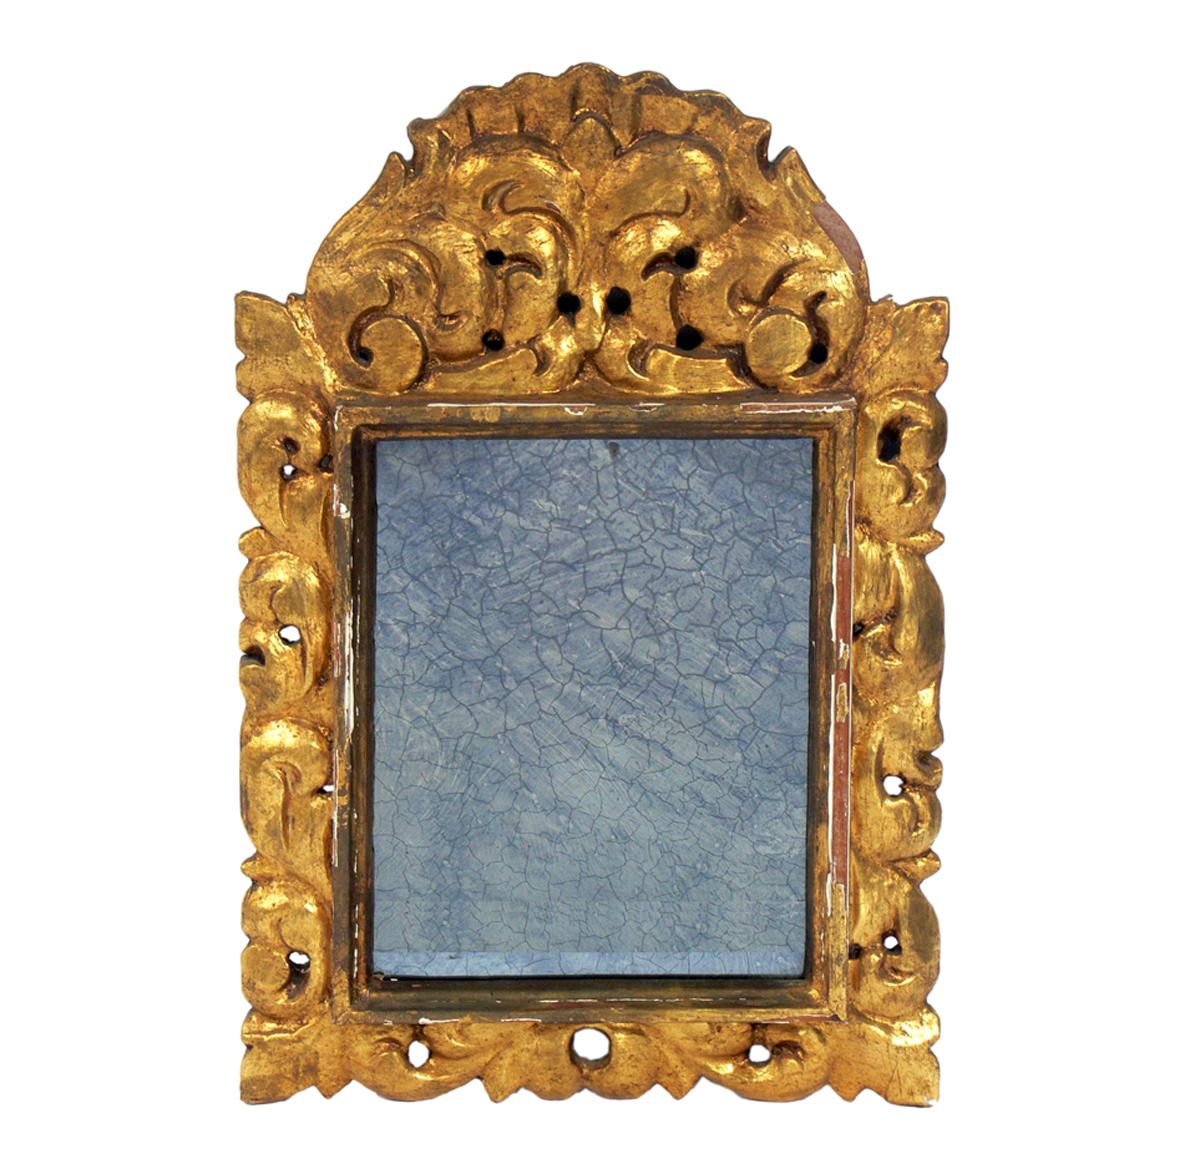 Selection of antiqued gilt mirrors #5, circa mid-20th century.
They are:
1) Spanish gilt mirror, circa 1940s. Retains original antiqued mirror. It is seen at the left in the first photo. It measures 17.5